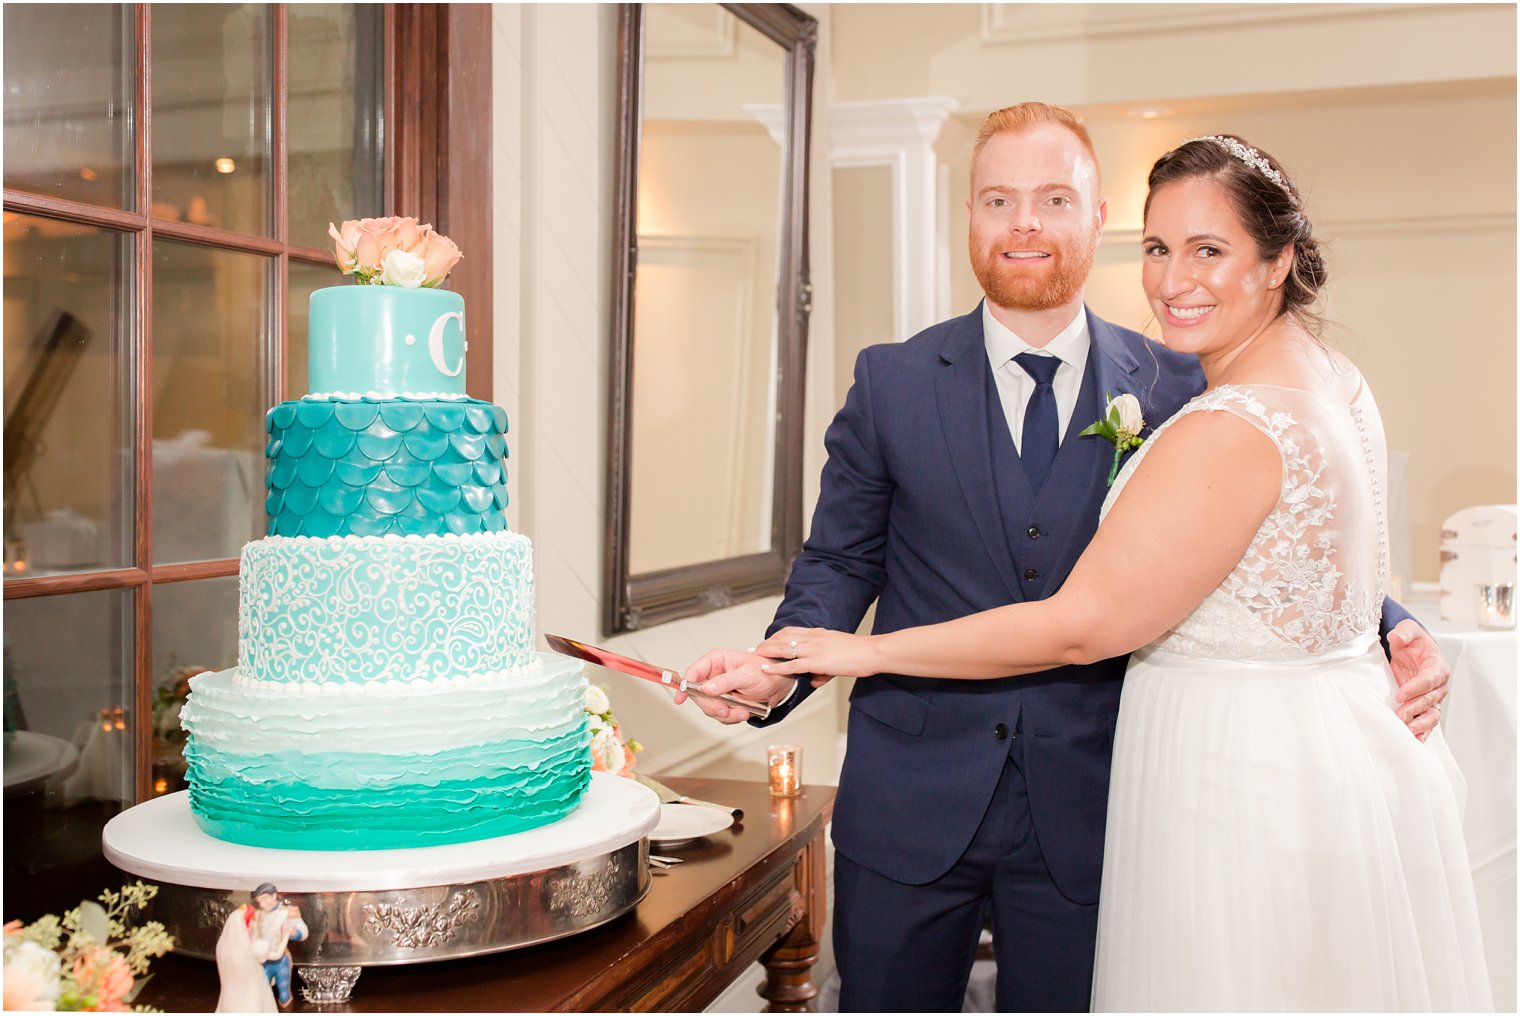 bride and groom cut teal wedding cake by Carlo's Bakery at Lake Mohawk Country Club wedding reception